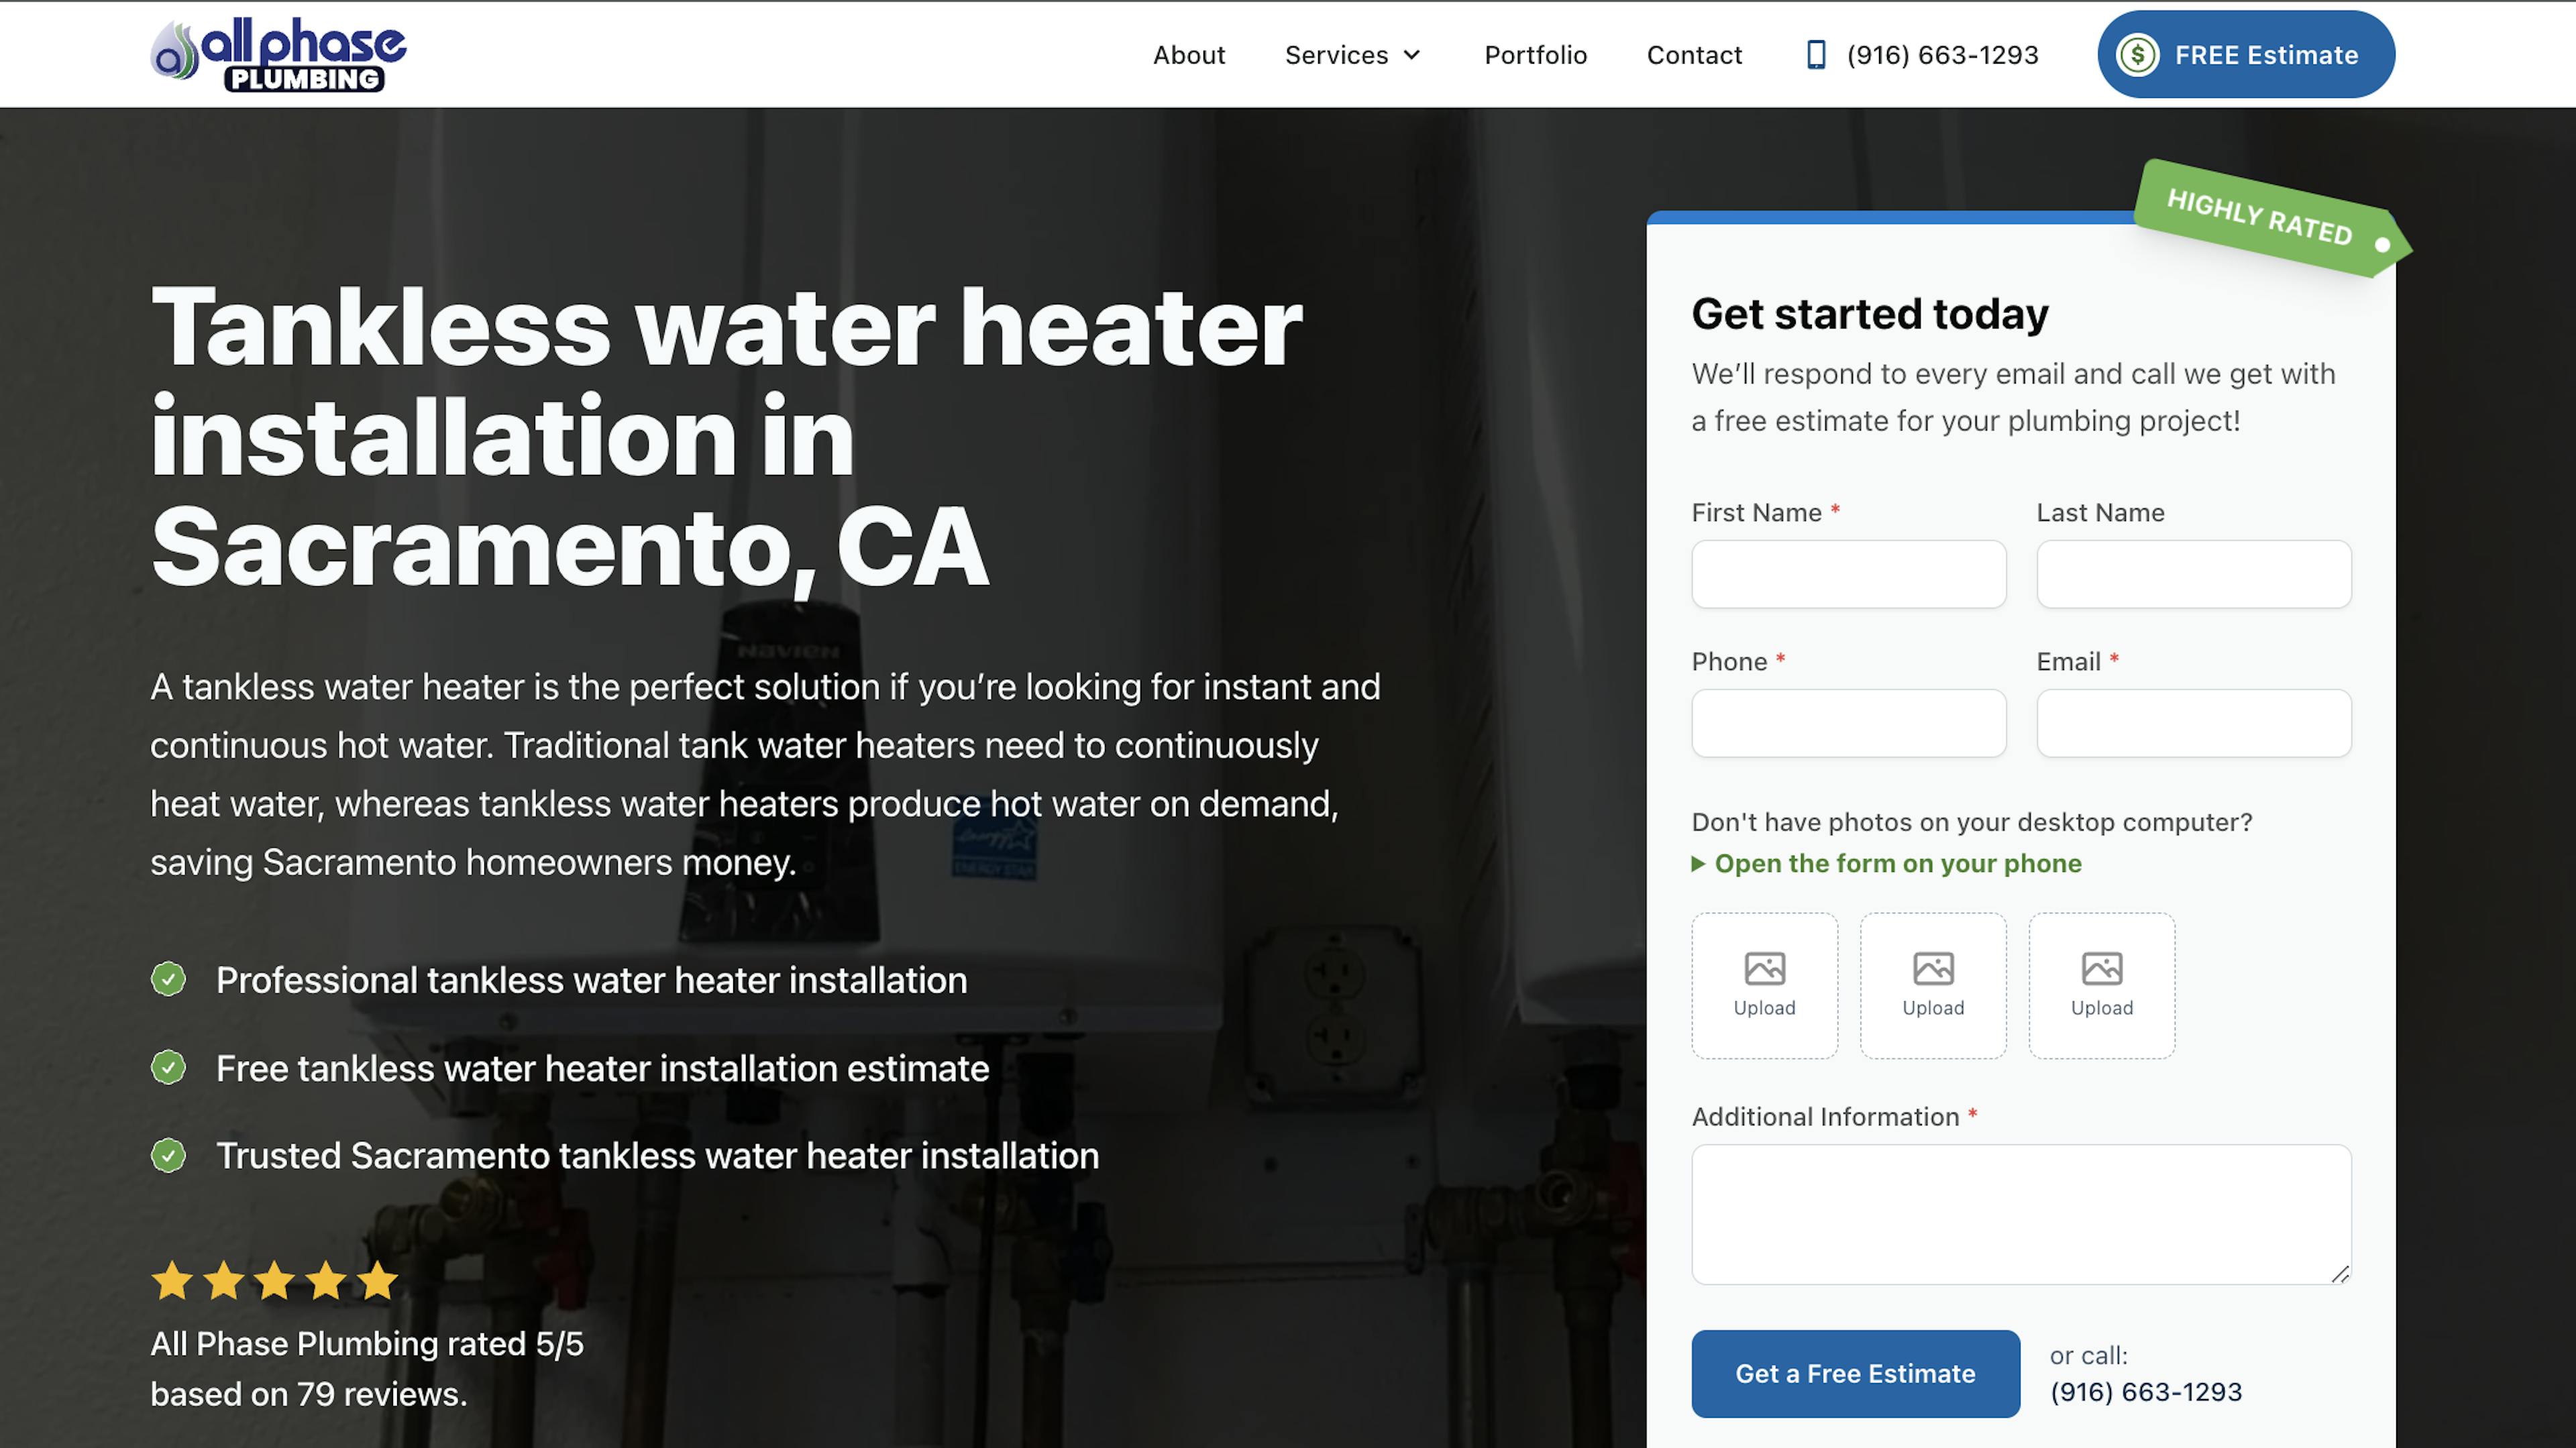 Webpage detailing tankless water heater installation services in Sacramento, CA, with a focus on instant and continuous hot water benefits. Features include professional installation, free estimates, and trusted service, alongside an image of a wall-mounted tankless water heater. A contact form offers easy submission for free estimates, with options to upload photos and a highly rated badge for the service provider.